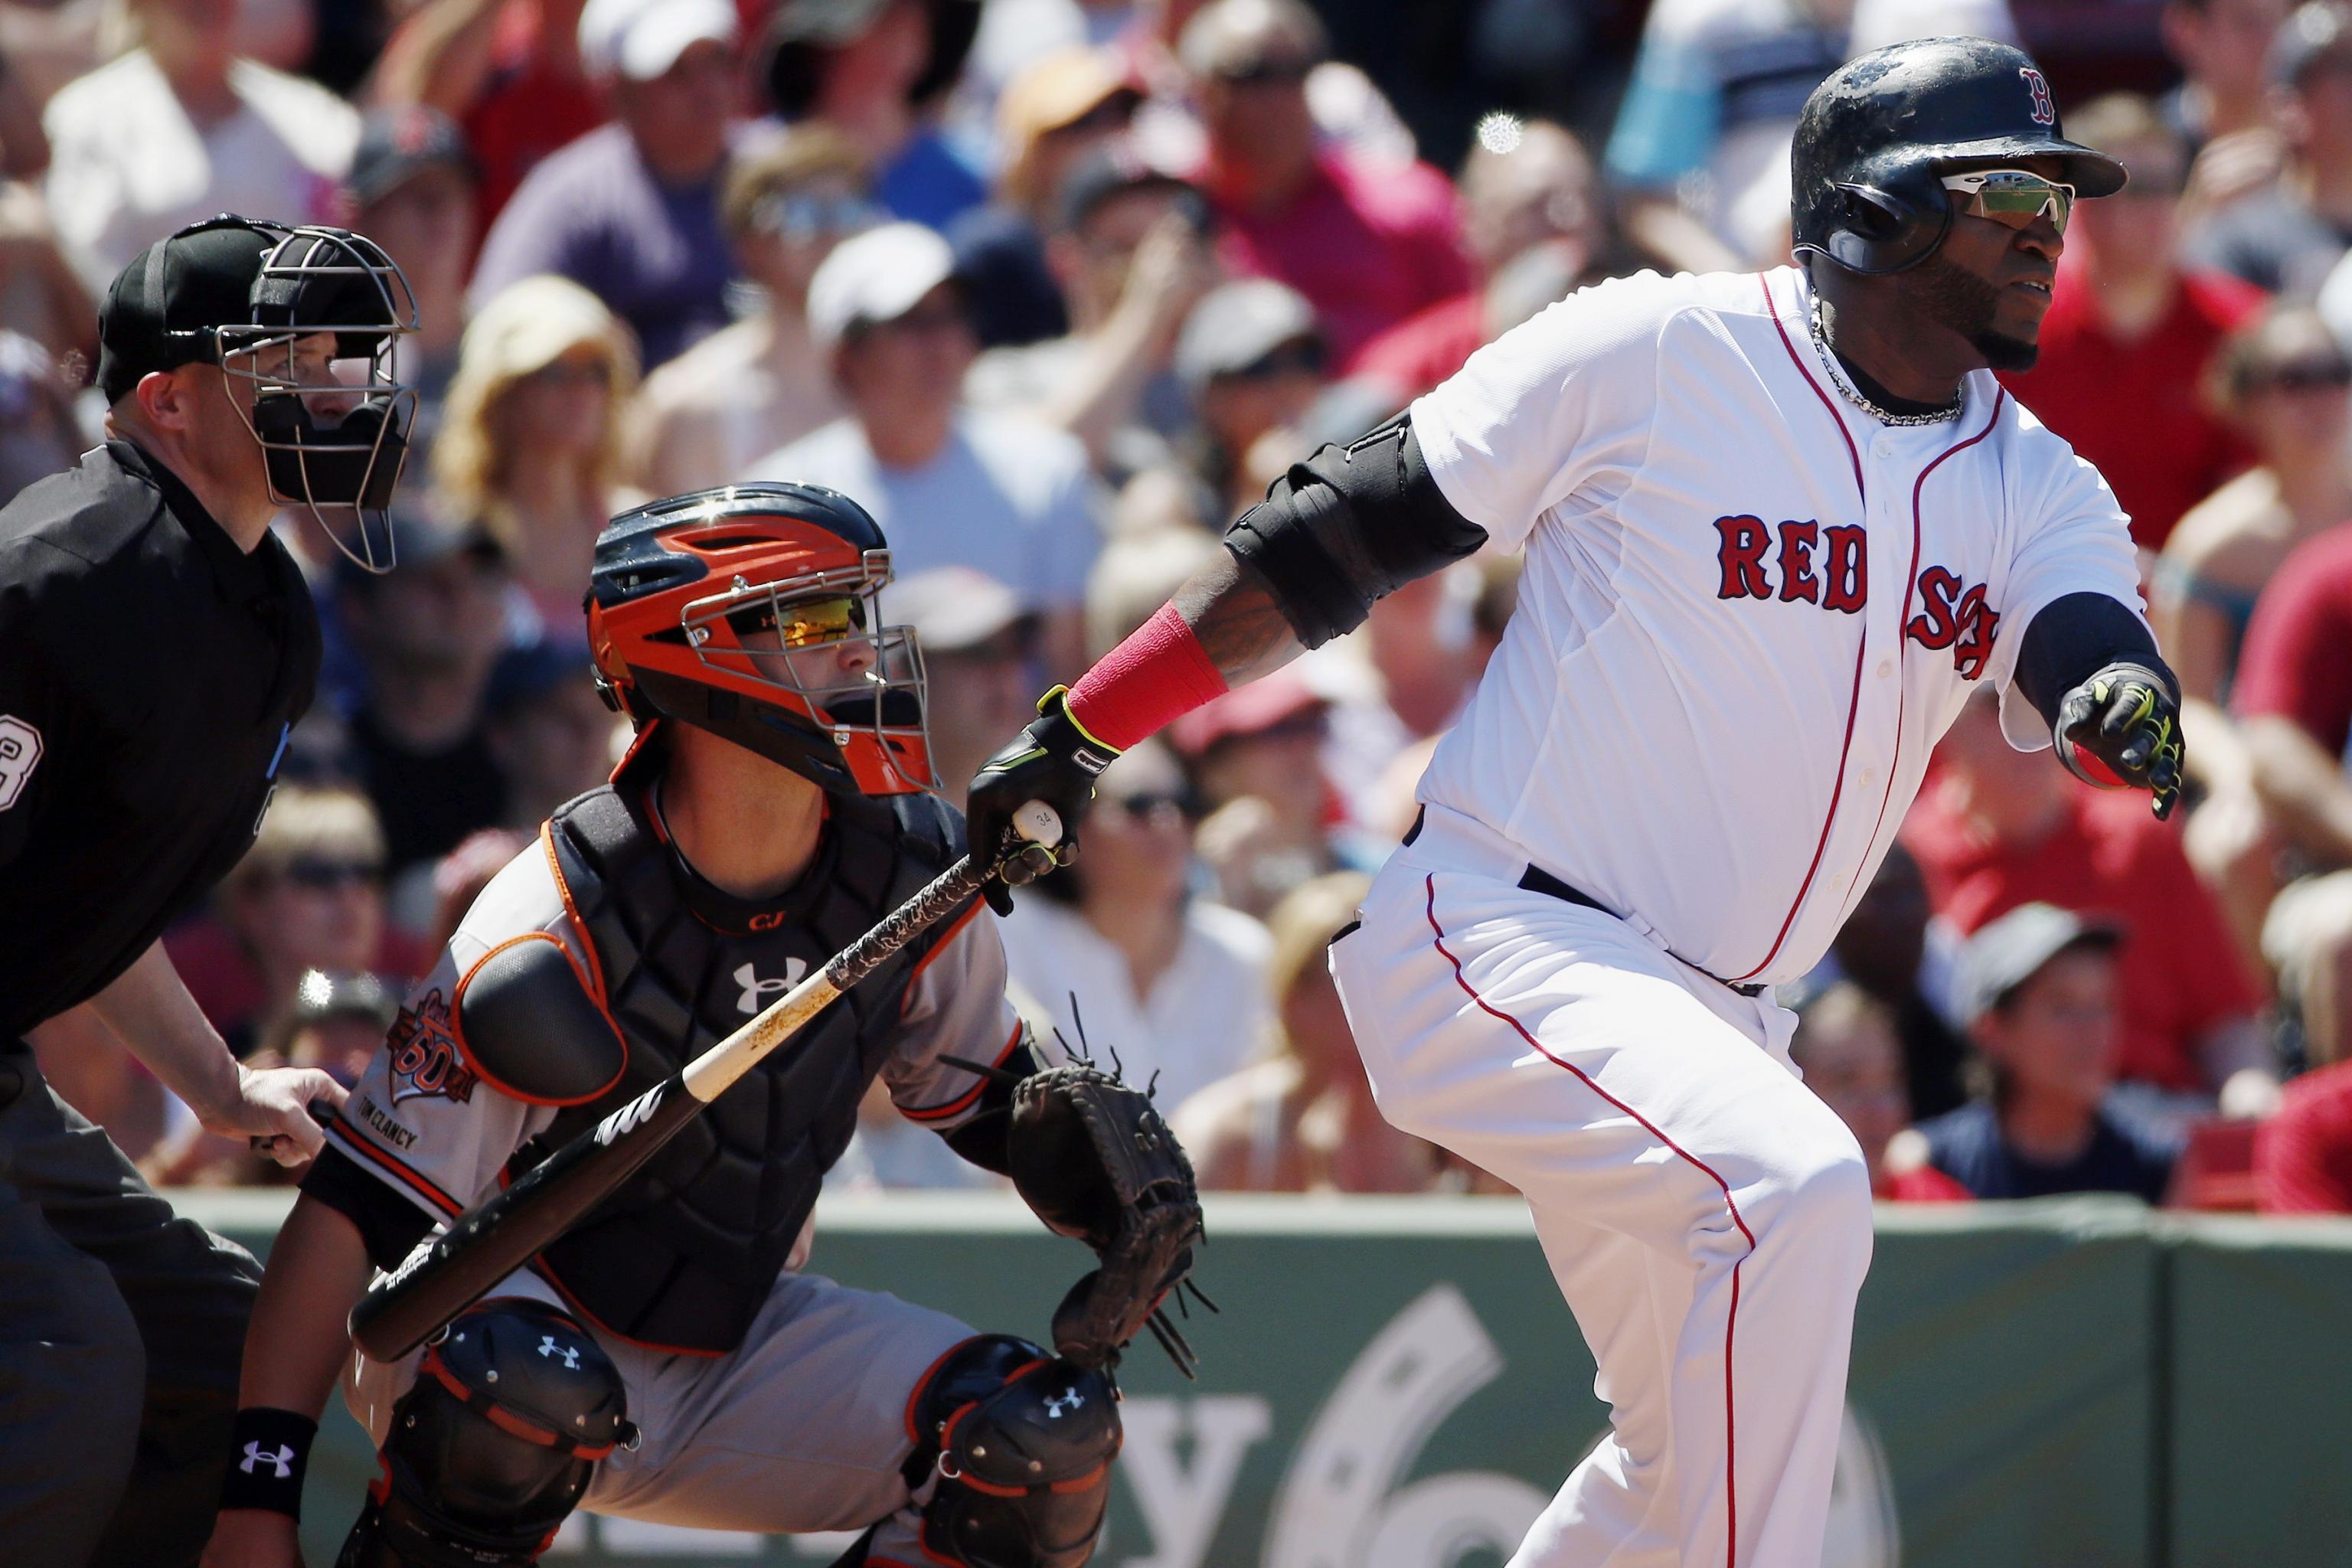 THIS DAY IN BÉISBOL May 14: David Ortiz is only 3rd player to reach 500 HR,  600 doubles - Latino Baseball